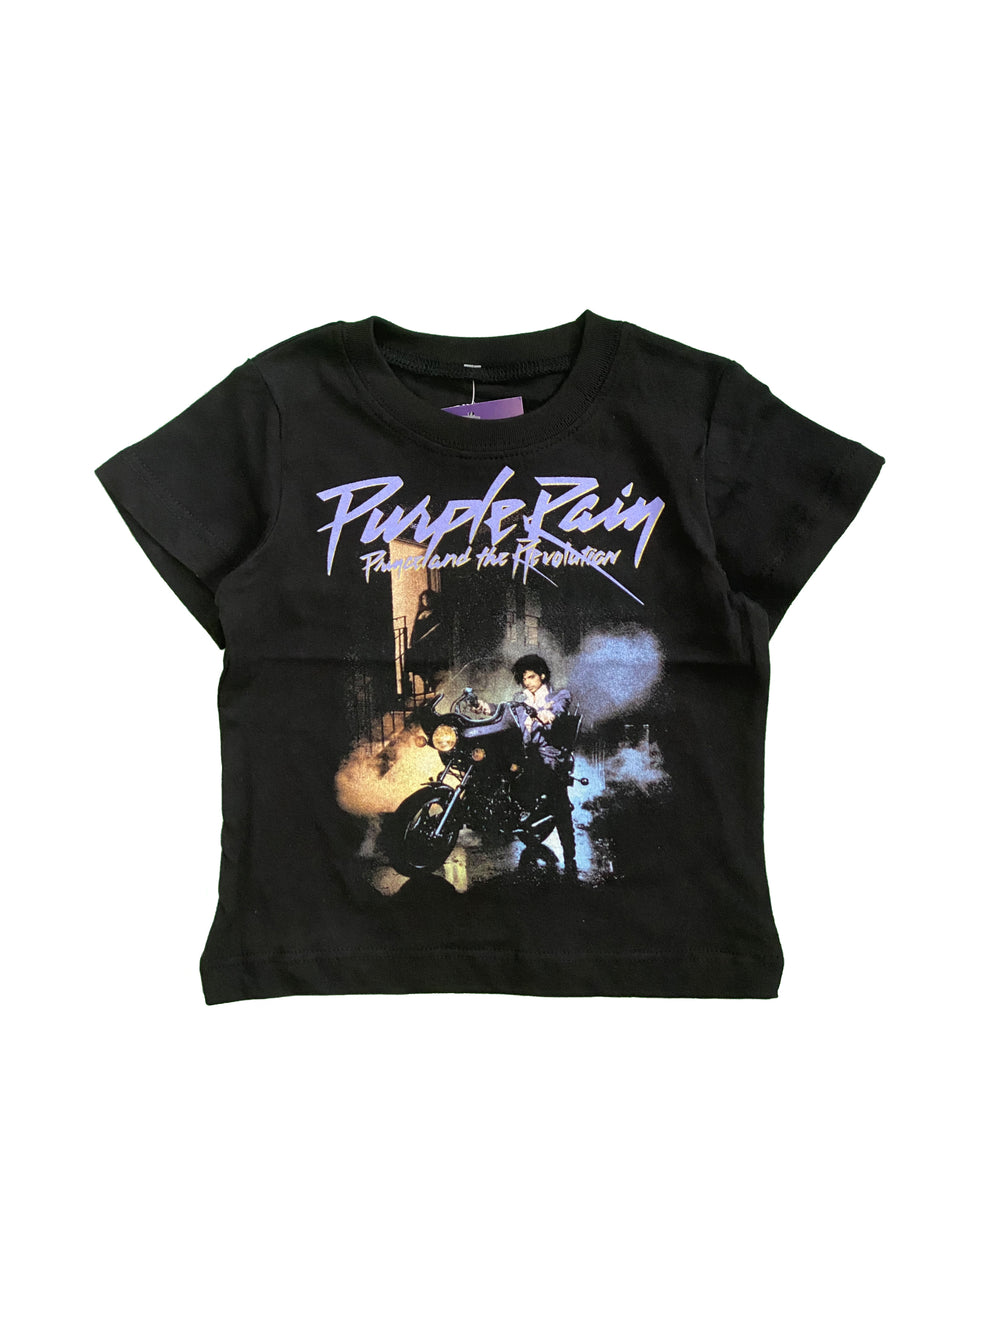 Prince – Purple Rain Official Merchandise Toddlers Shirt Various Sizes Kids NEW